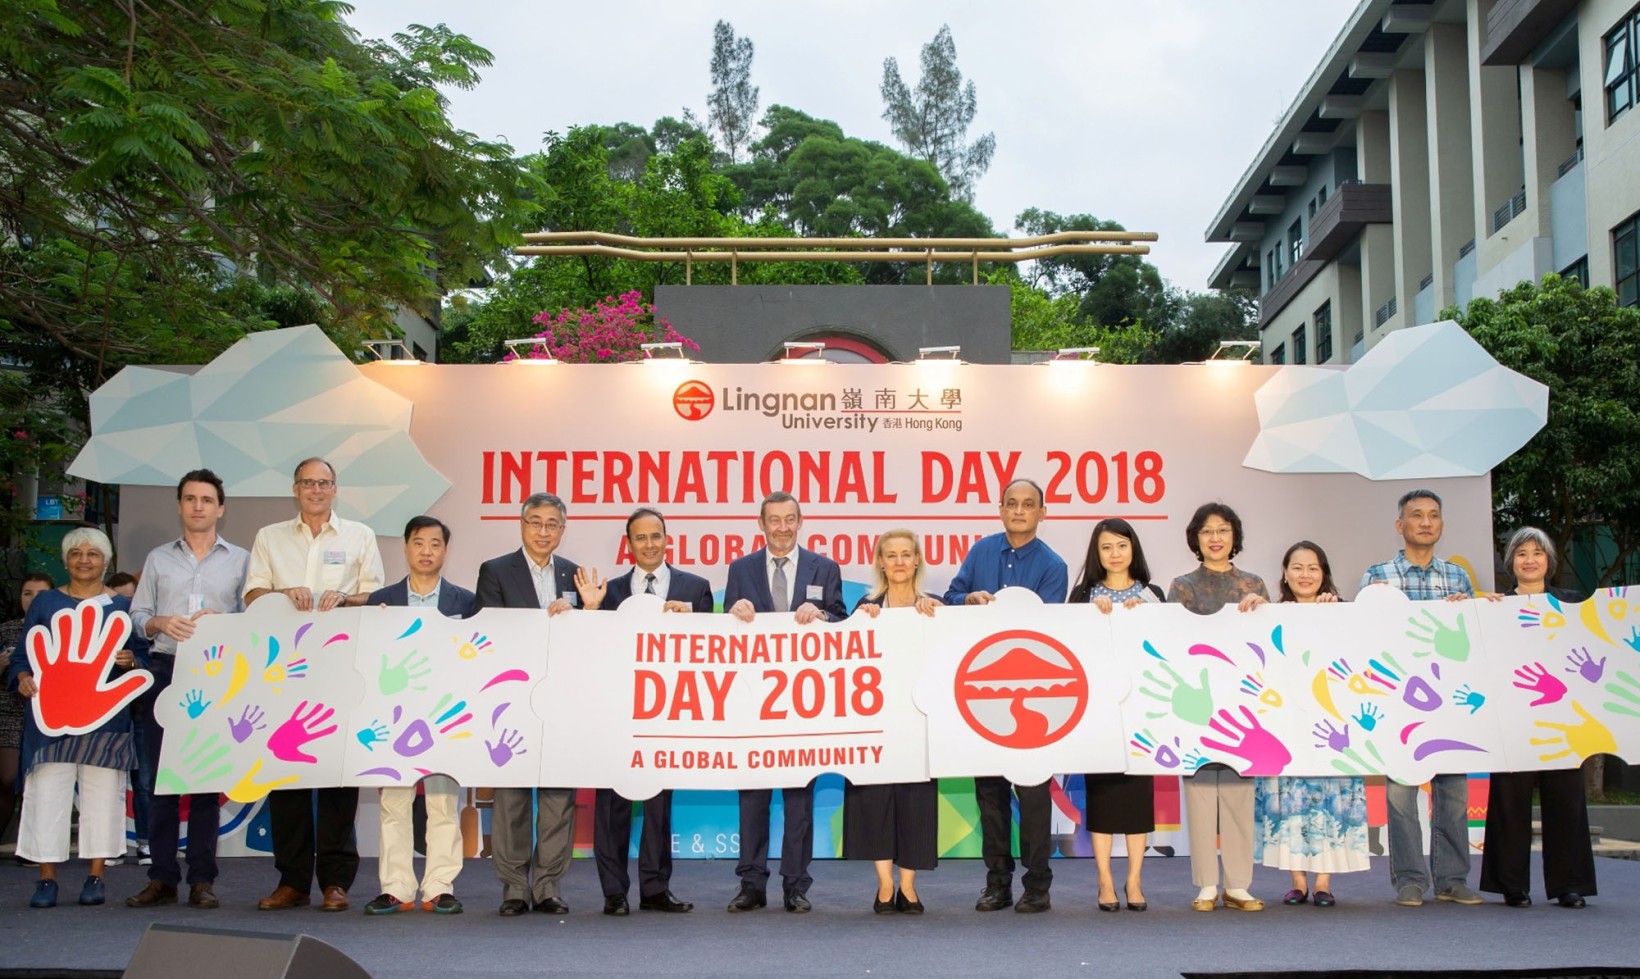 International Day 2018 connects students to “A Global Community”